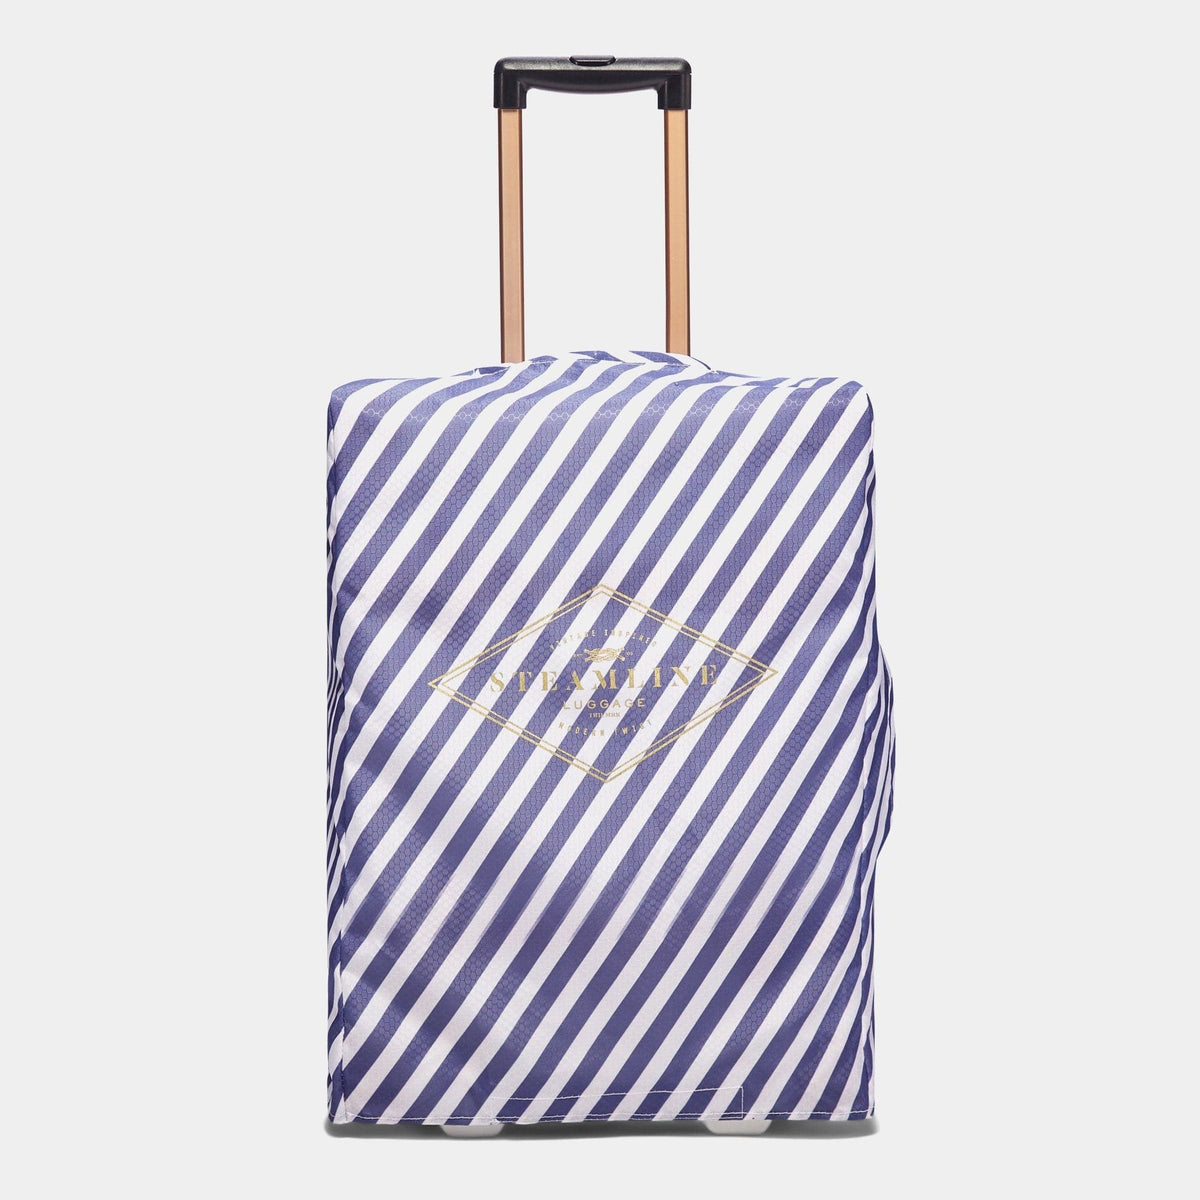 The Signature Stripe Protective Cover - Stowaway Size Protective Cover Steamline Luggage 